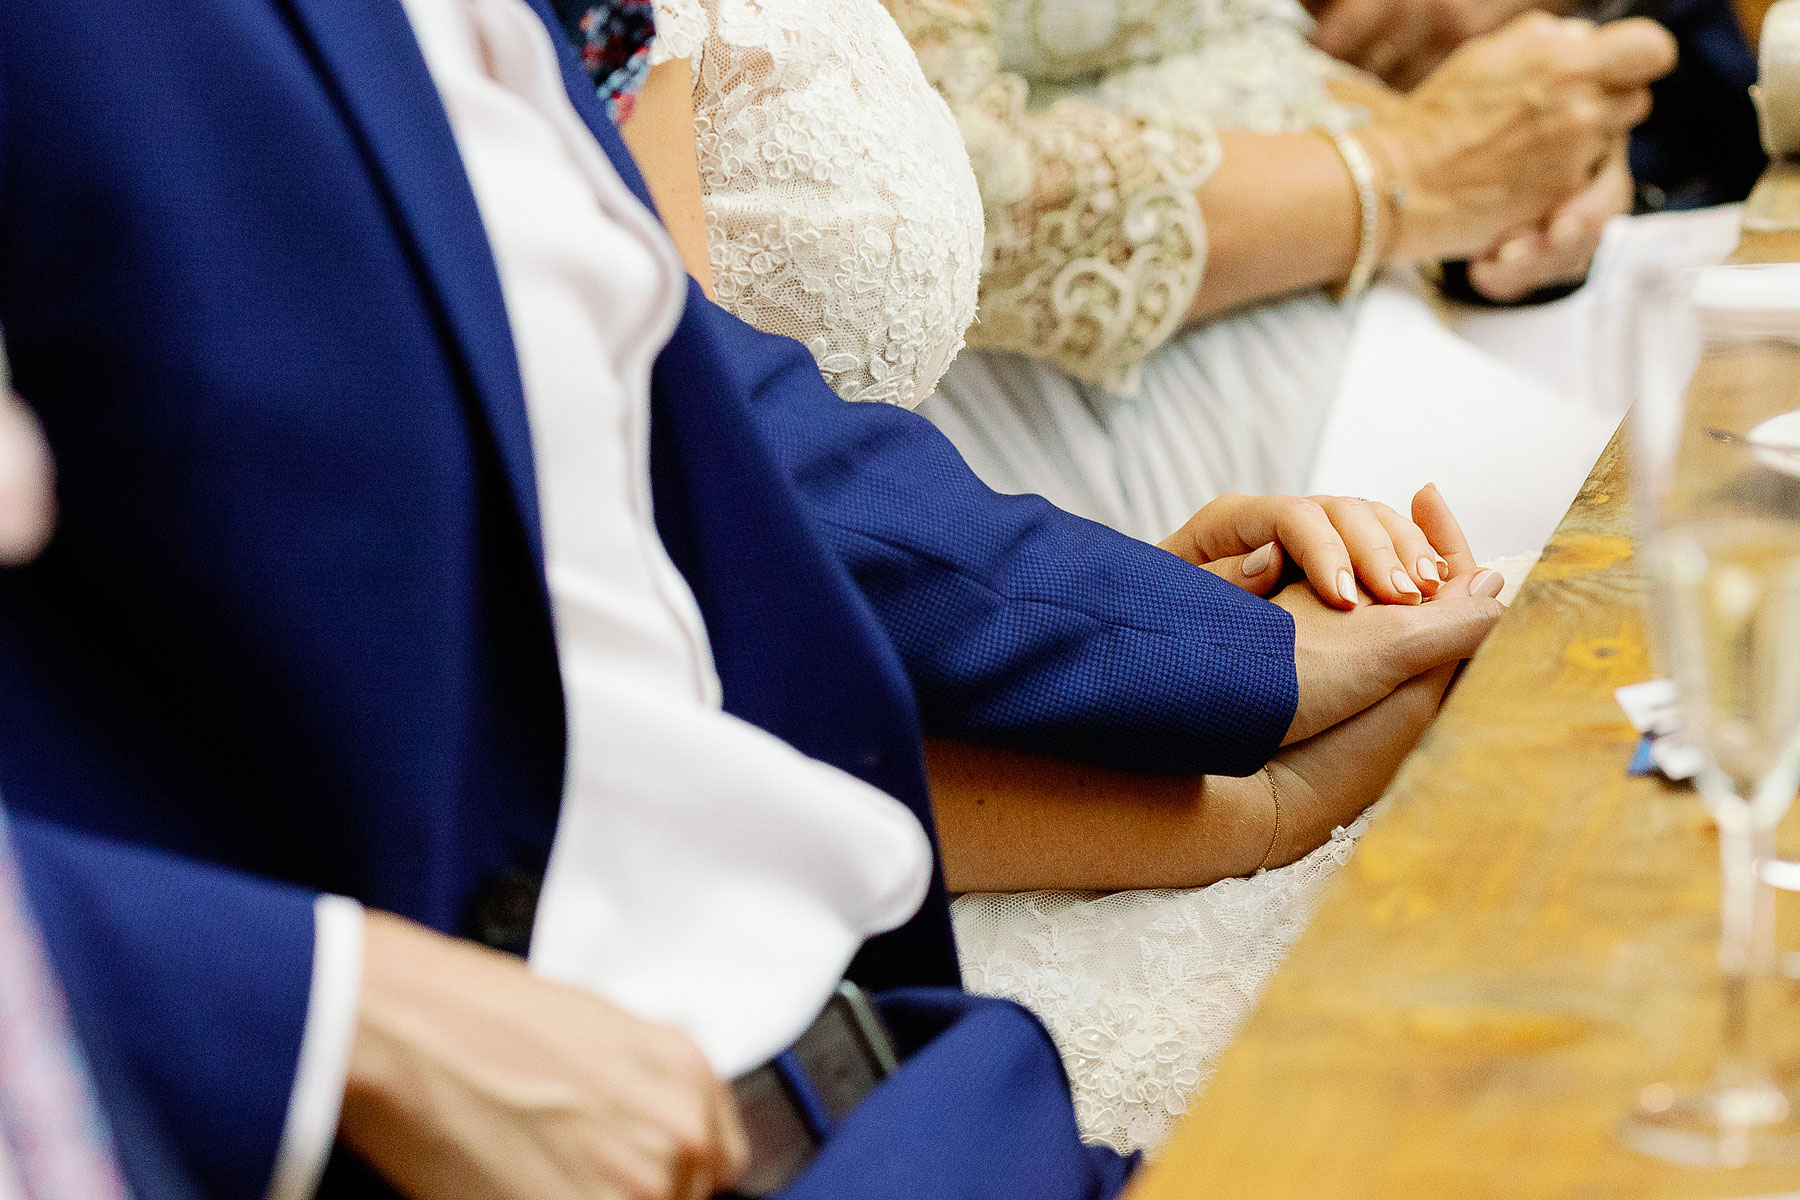 holding hands at a wedding